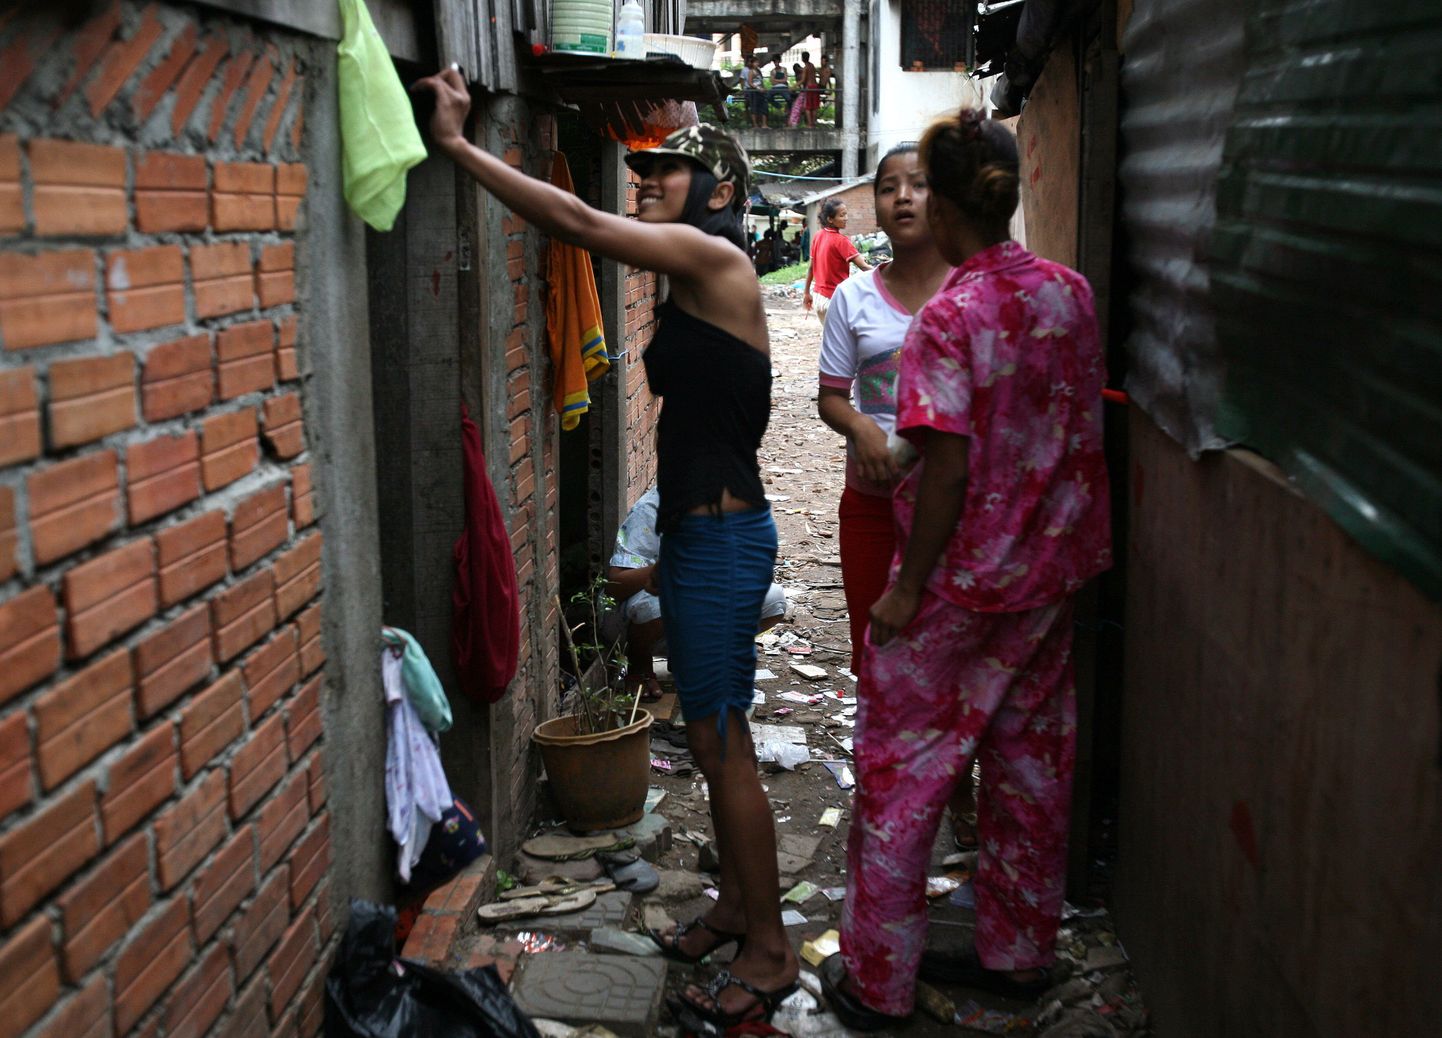 Cambodian prostitutes stand near a shelter at a slum village in Phnom Penh on June 10, 2008.  The United States said that Cambodia still needs to do more to fight human trafficking, even though an annual State Department report said the nation had made progress. AFP PHOTO/ TANG CHHIN SOTHY